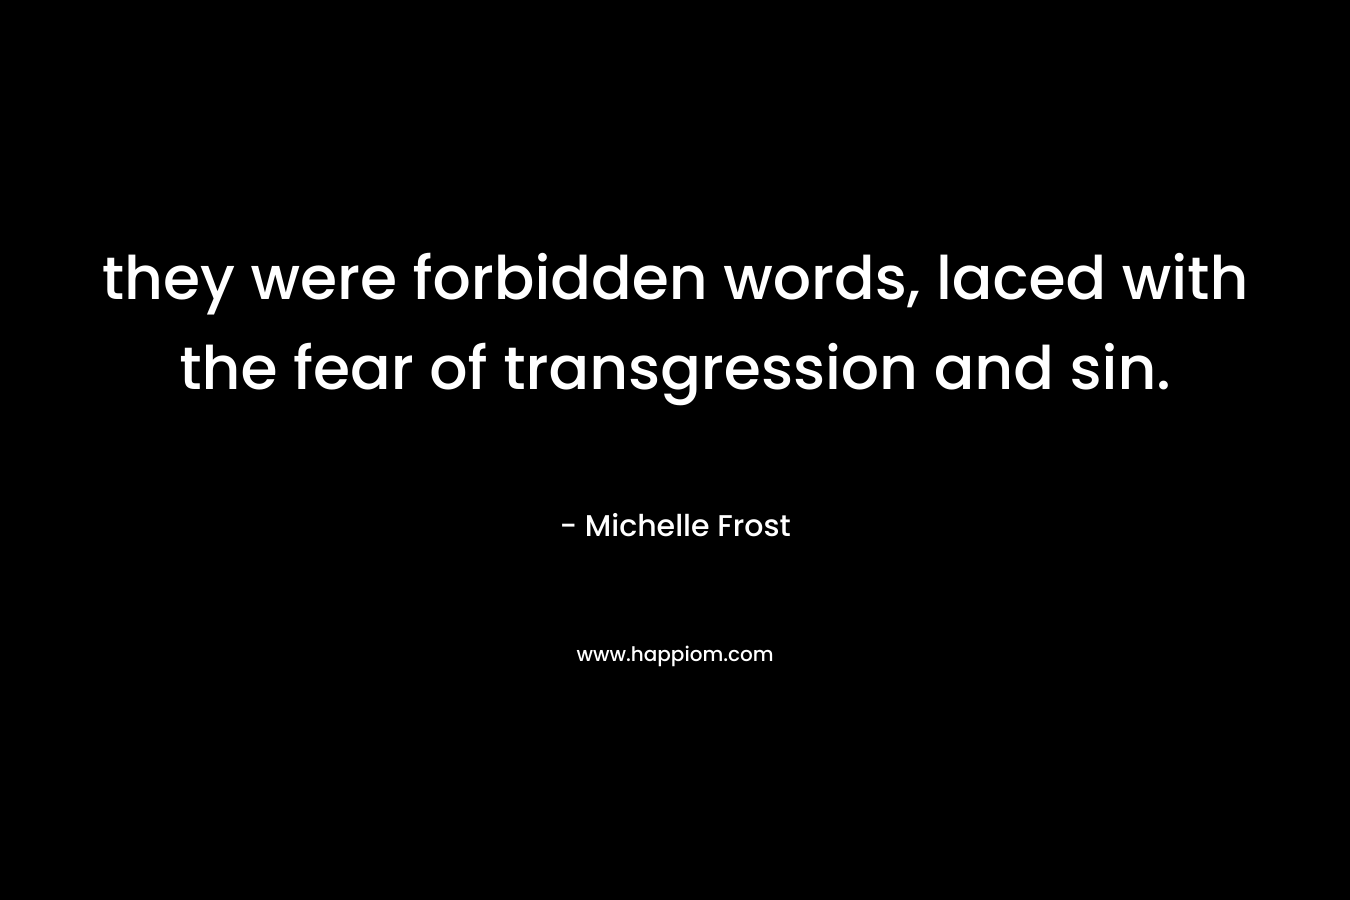 they were forbidden words, laced with the fear of transgression and sin.